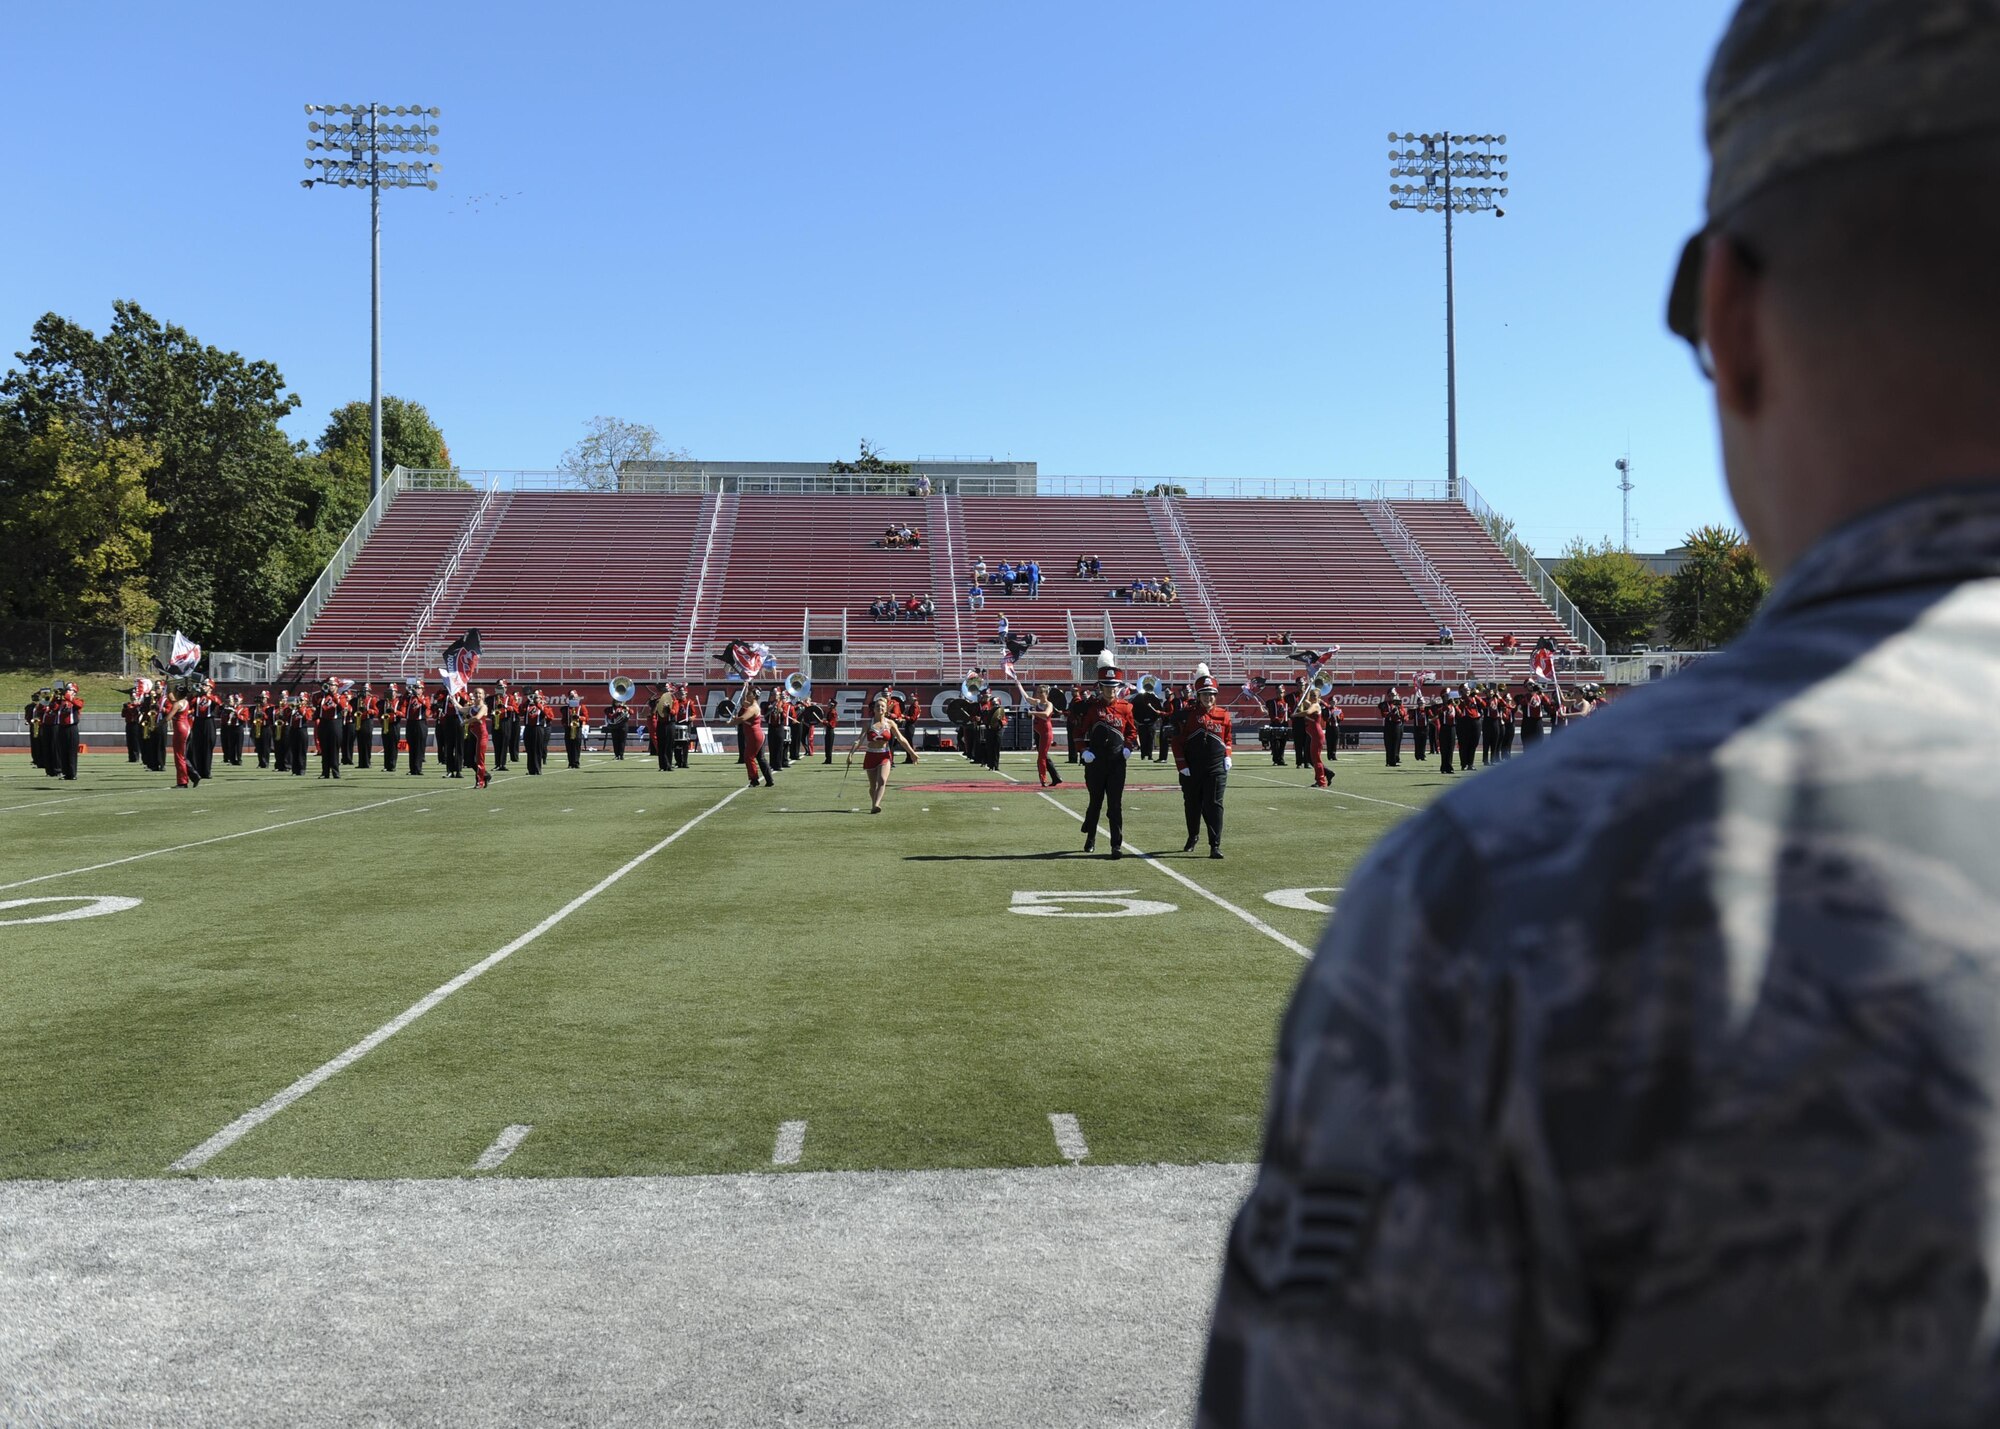 Hundreds of military families attended a free tailgate and game during Military Appreciation Day at the University of Central Missouri (UCM) in Warrensburg, Mo., Oct. 8, 2015. U.S. Air Force Brig. Gen. Paul W. Tibbets IV, thw 509th Bomb Wing commander, performed a coin toss before the start of the game. 